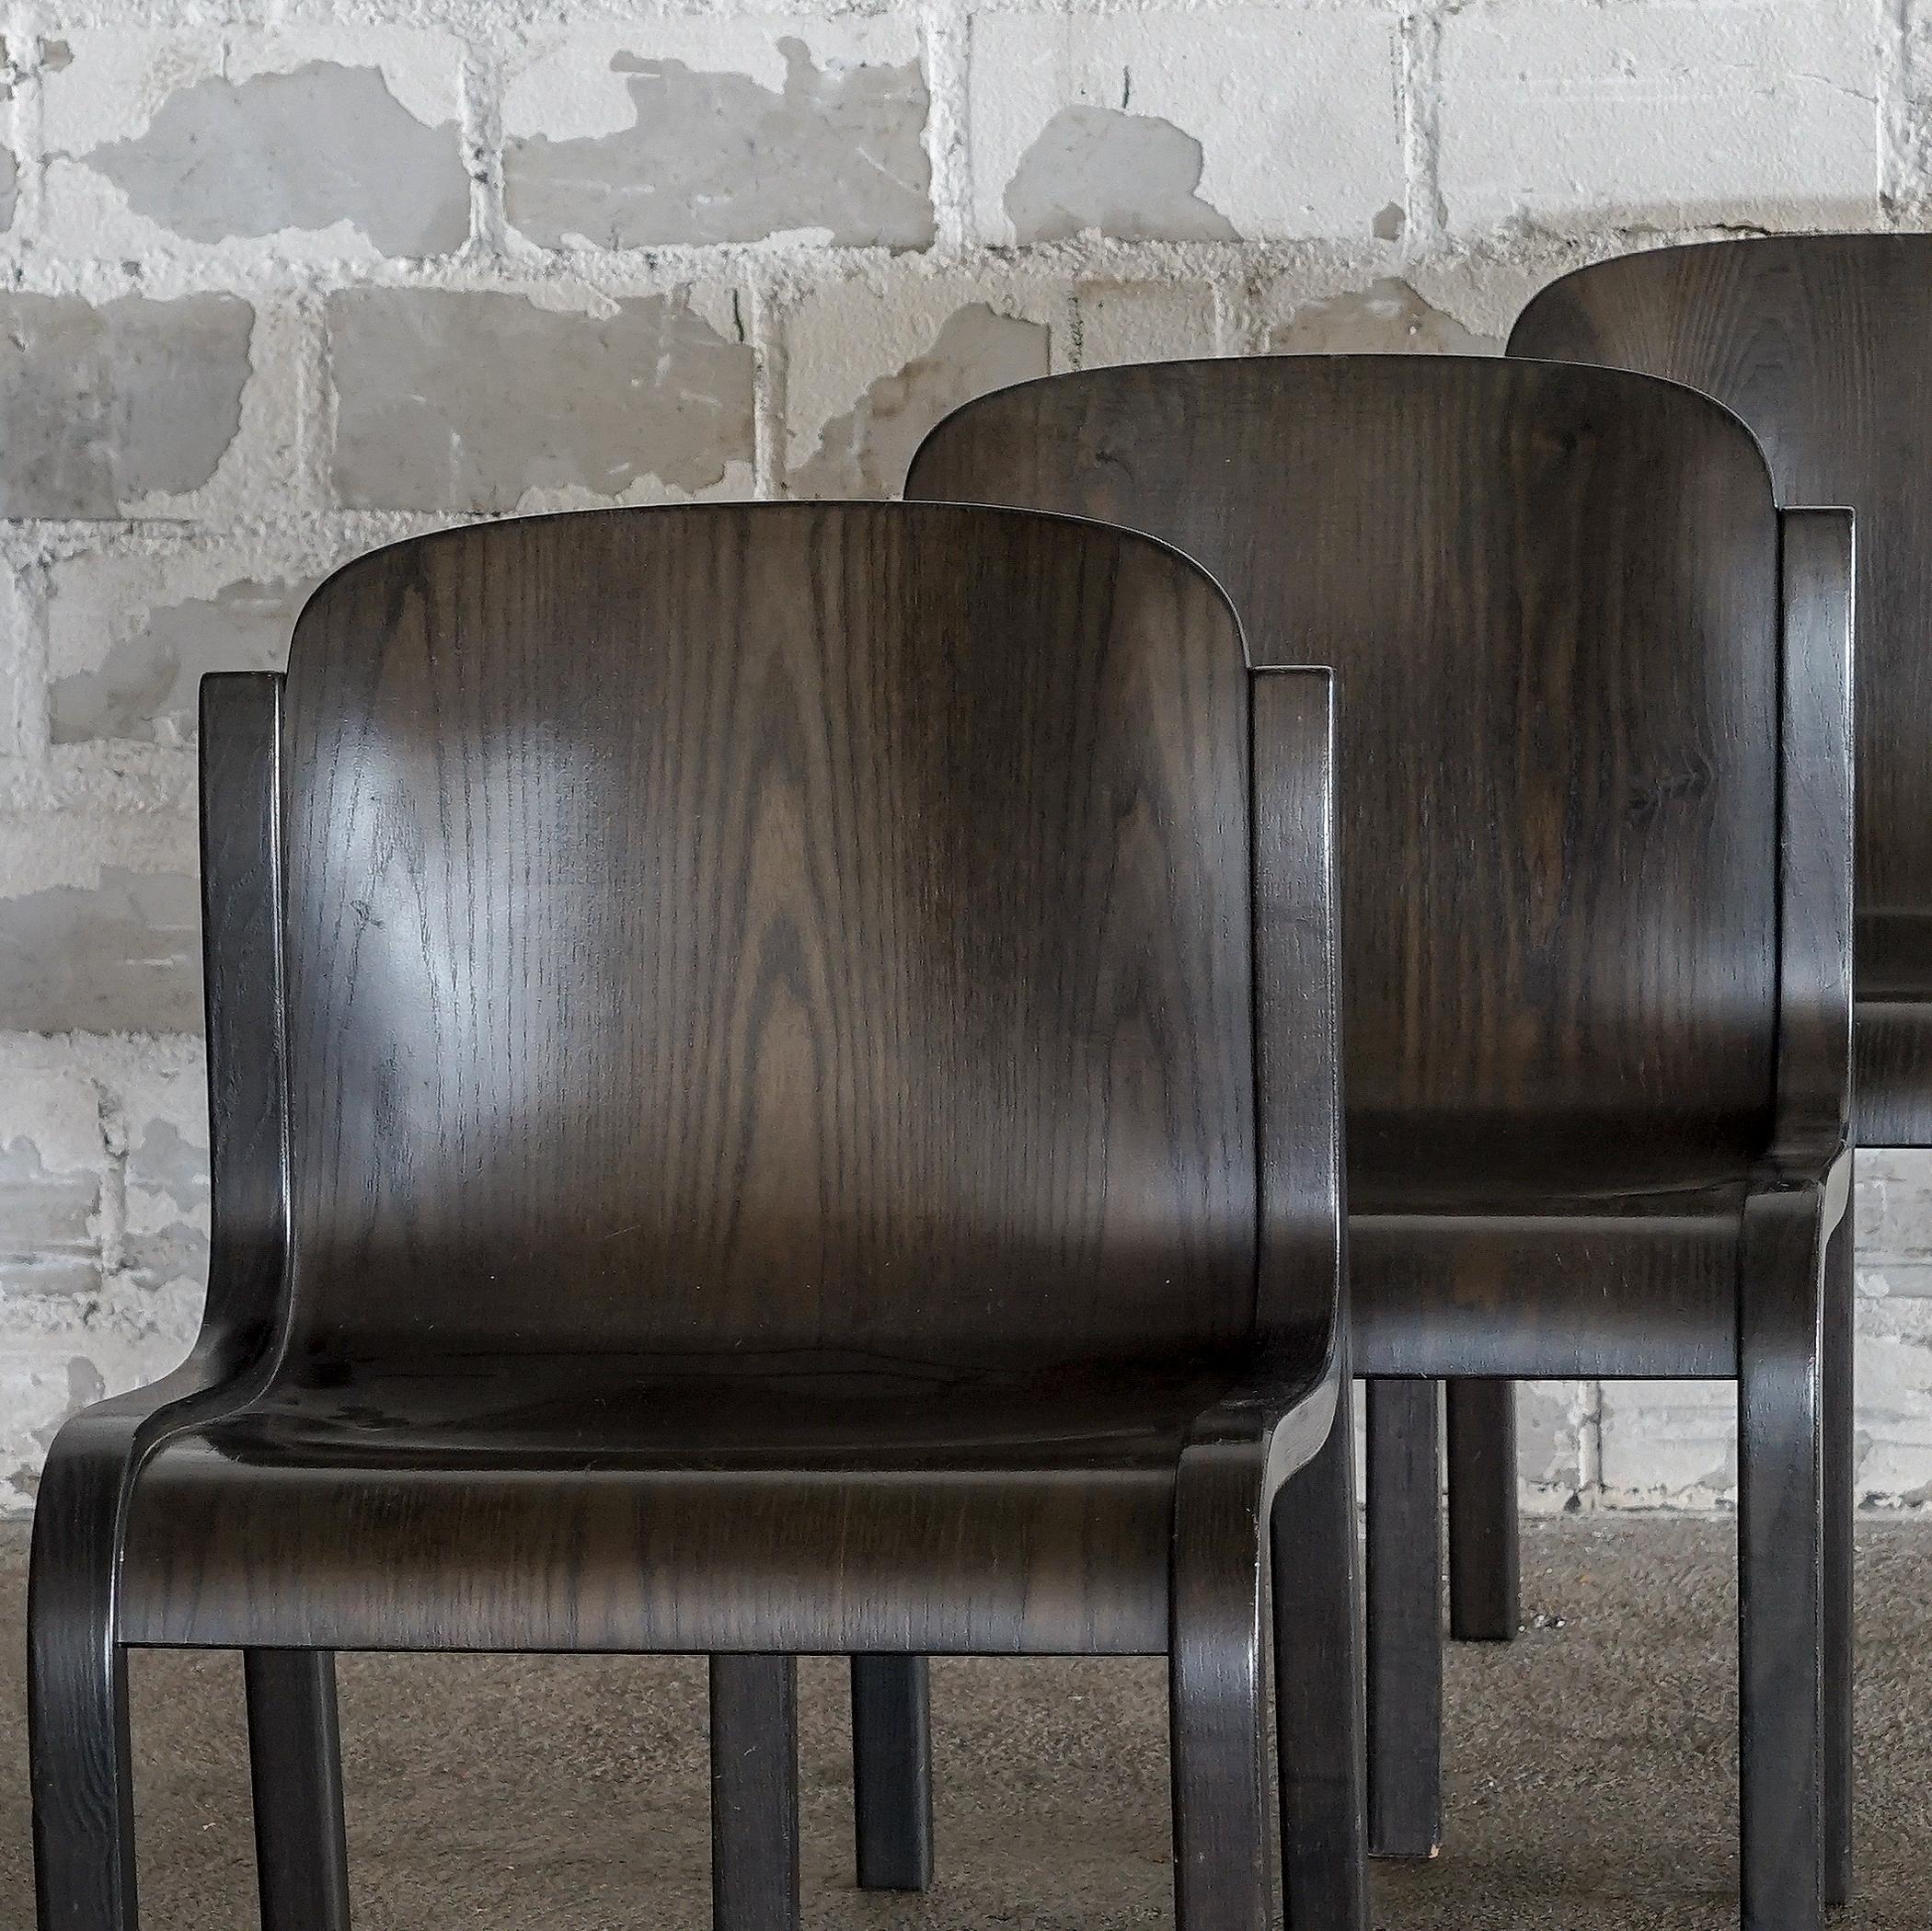 The harmonious, curved shape of the chairs melts the heart of every connoisseur of Italian design. The curved plywood seat merges into the legs in a single sweep. The chairs are very light, but at the same time very stabile and robust. The chairs